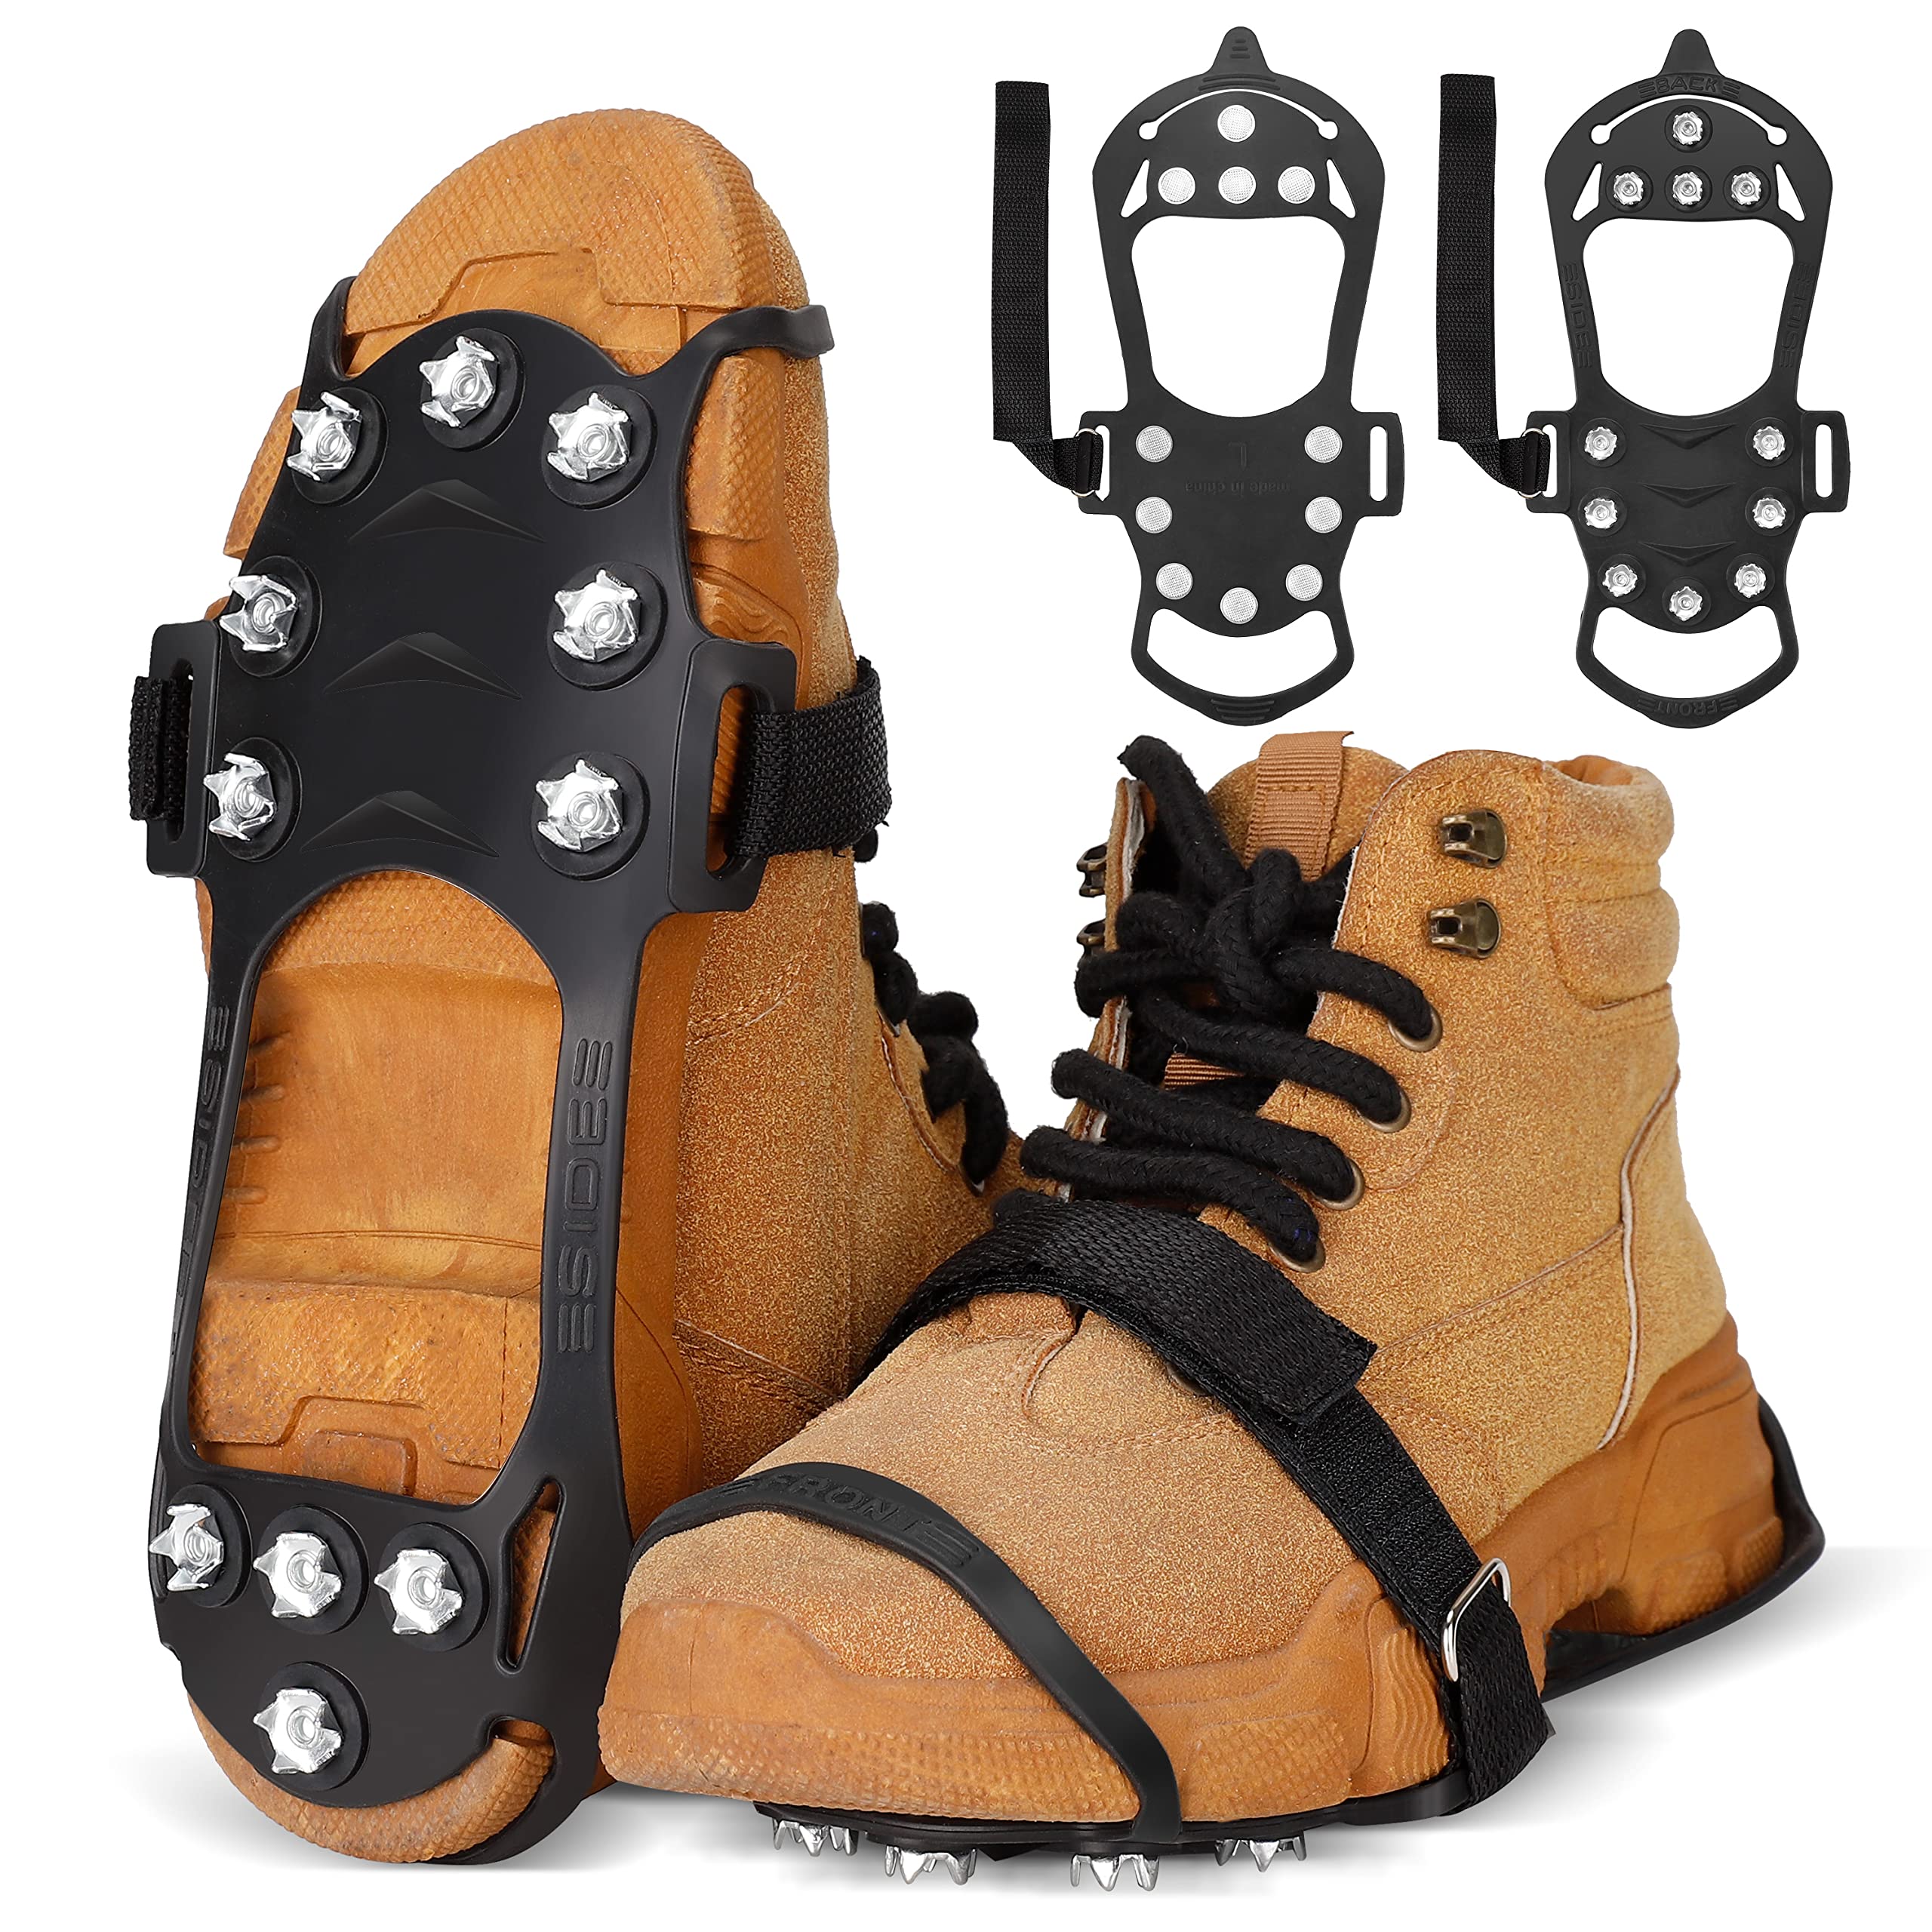 Carryown Ice Snow Grips Traction Cleats Shoe Ice Anti Slip Ice Cleats for  Shoes and Boots Ice Spikes Crampons (S, M, L, XL) M (Men:5-8/ Women:7-10)  11 Studs